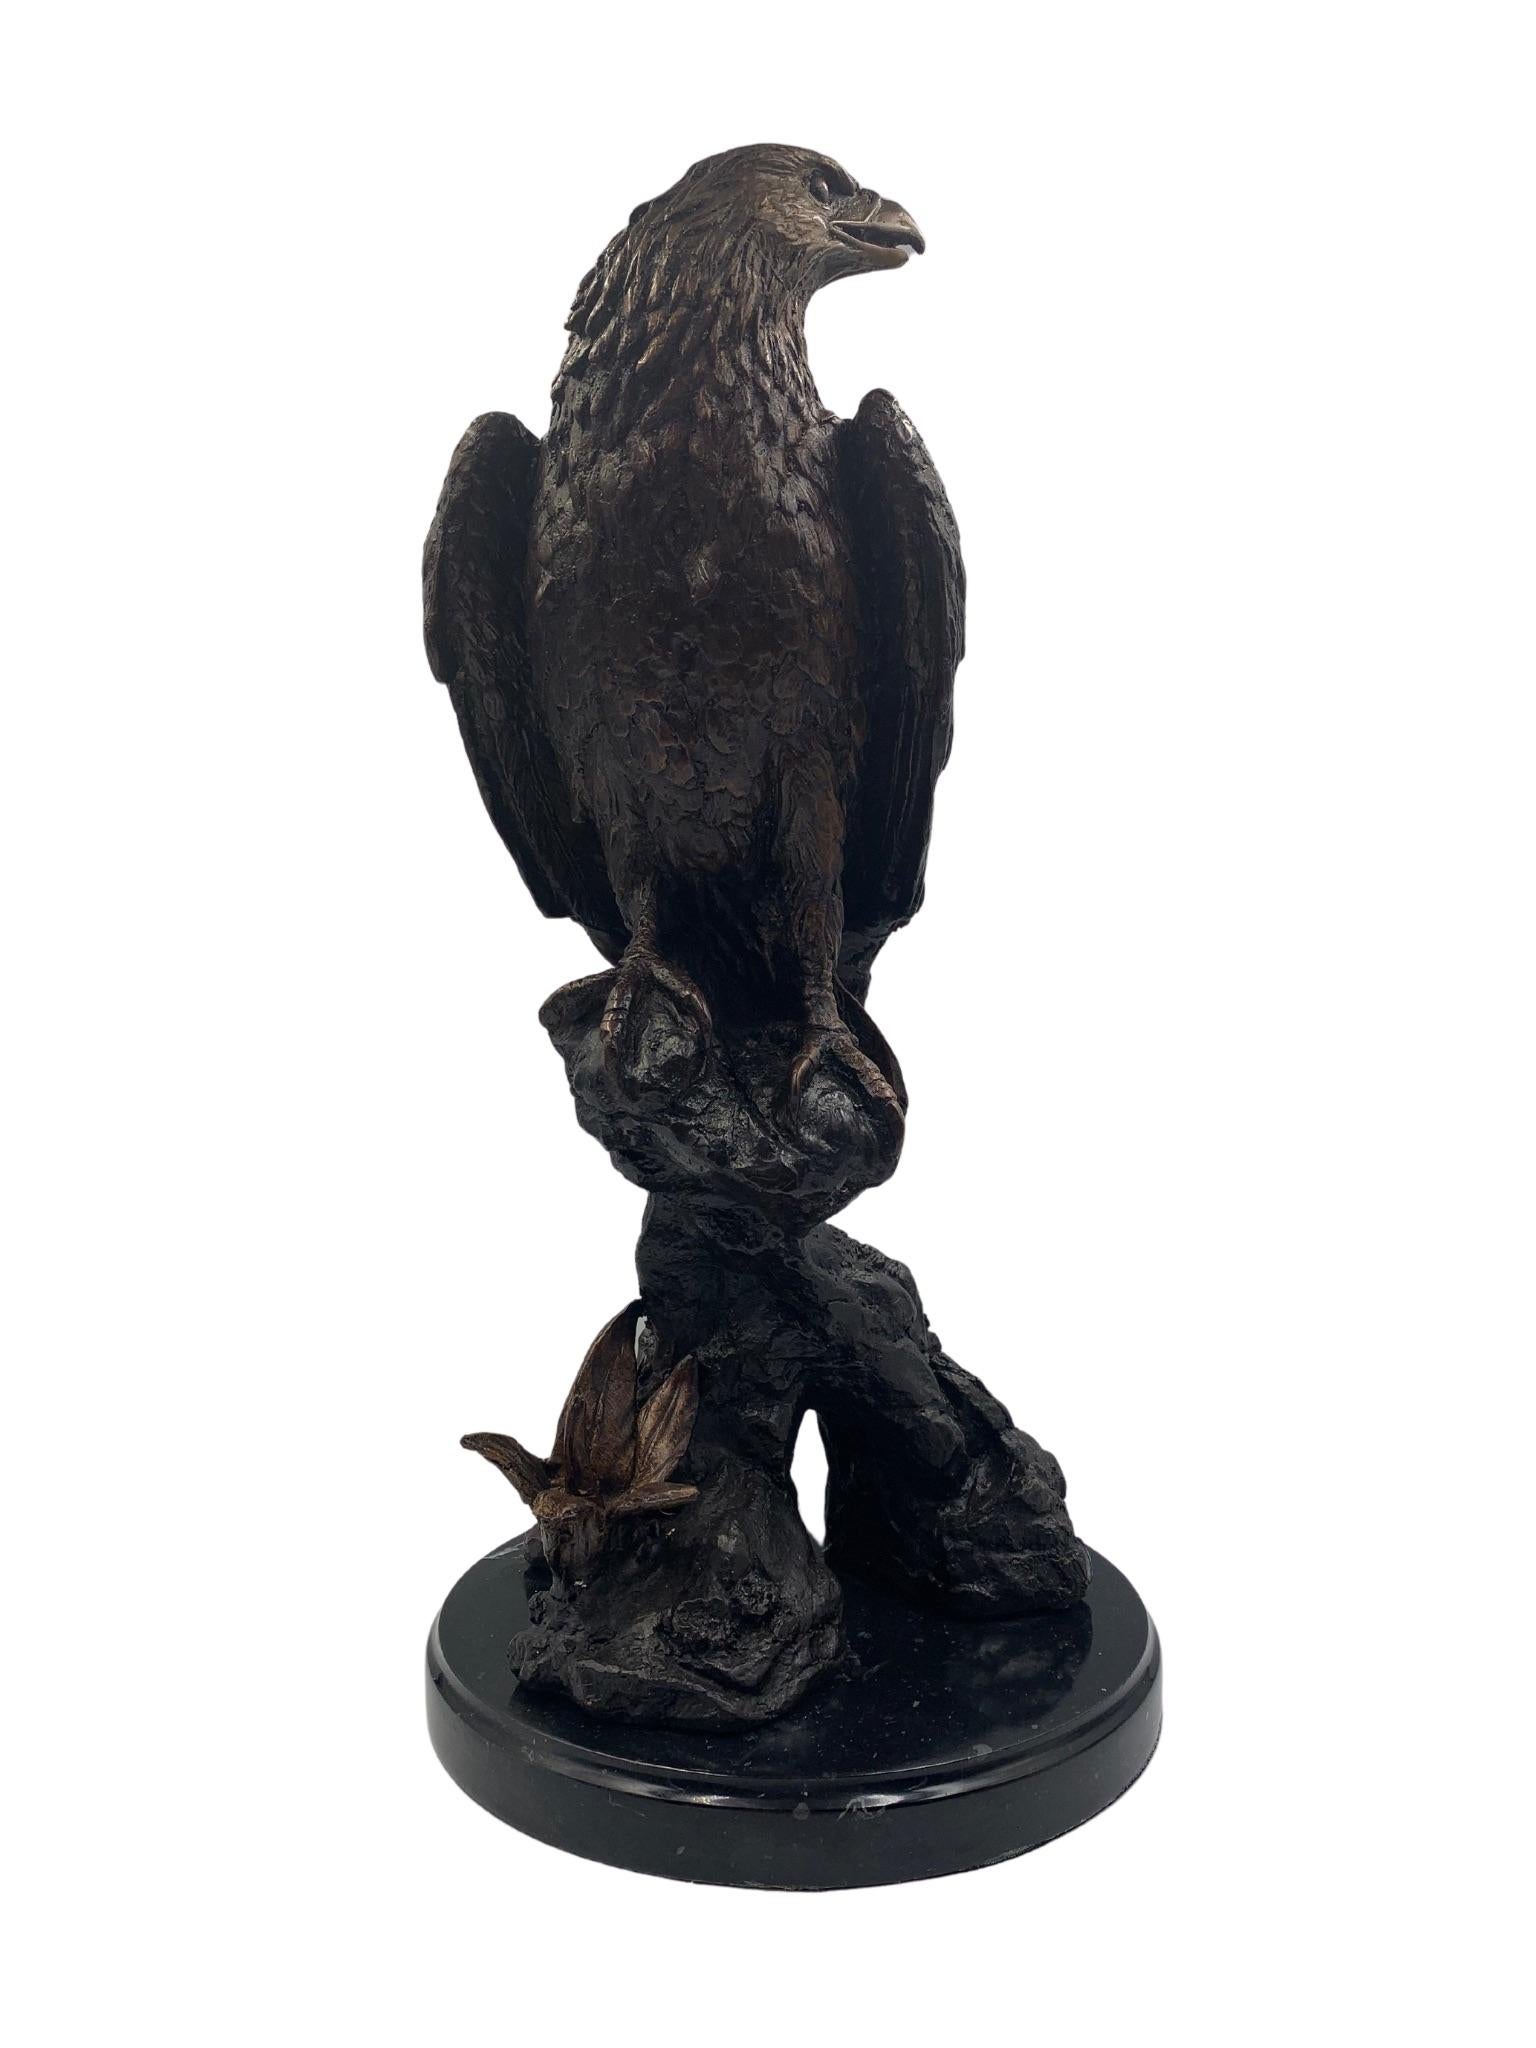 Presented is a 20th century bronze sculpture, after Jules Moigniez, of an eagle on a rocky perch. The dignified eagle has its wings tucked and his head turned to the side, showcasing exquisite craftsmanship. Textured feathers, a rugged base, and